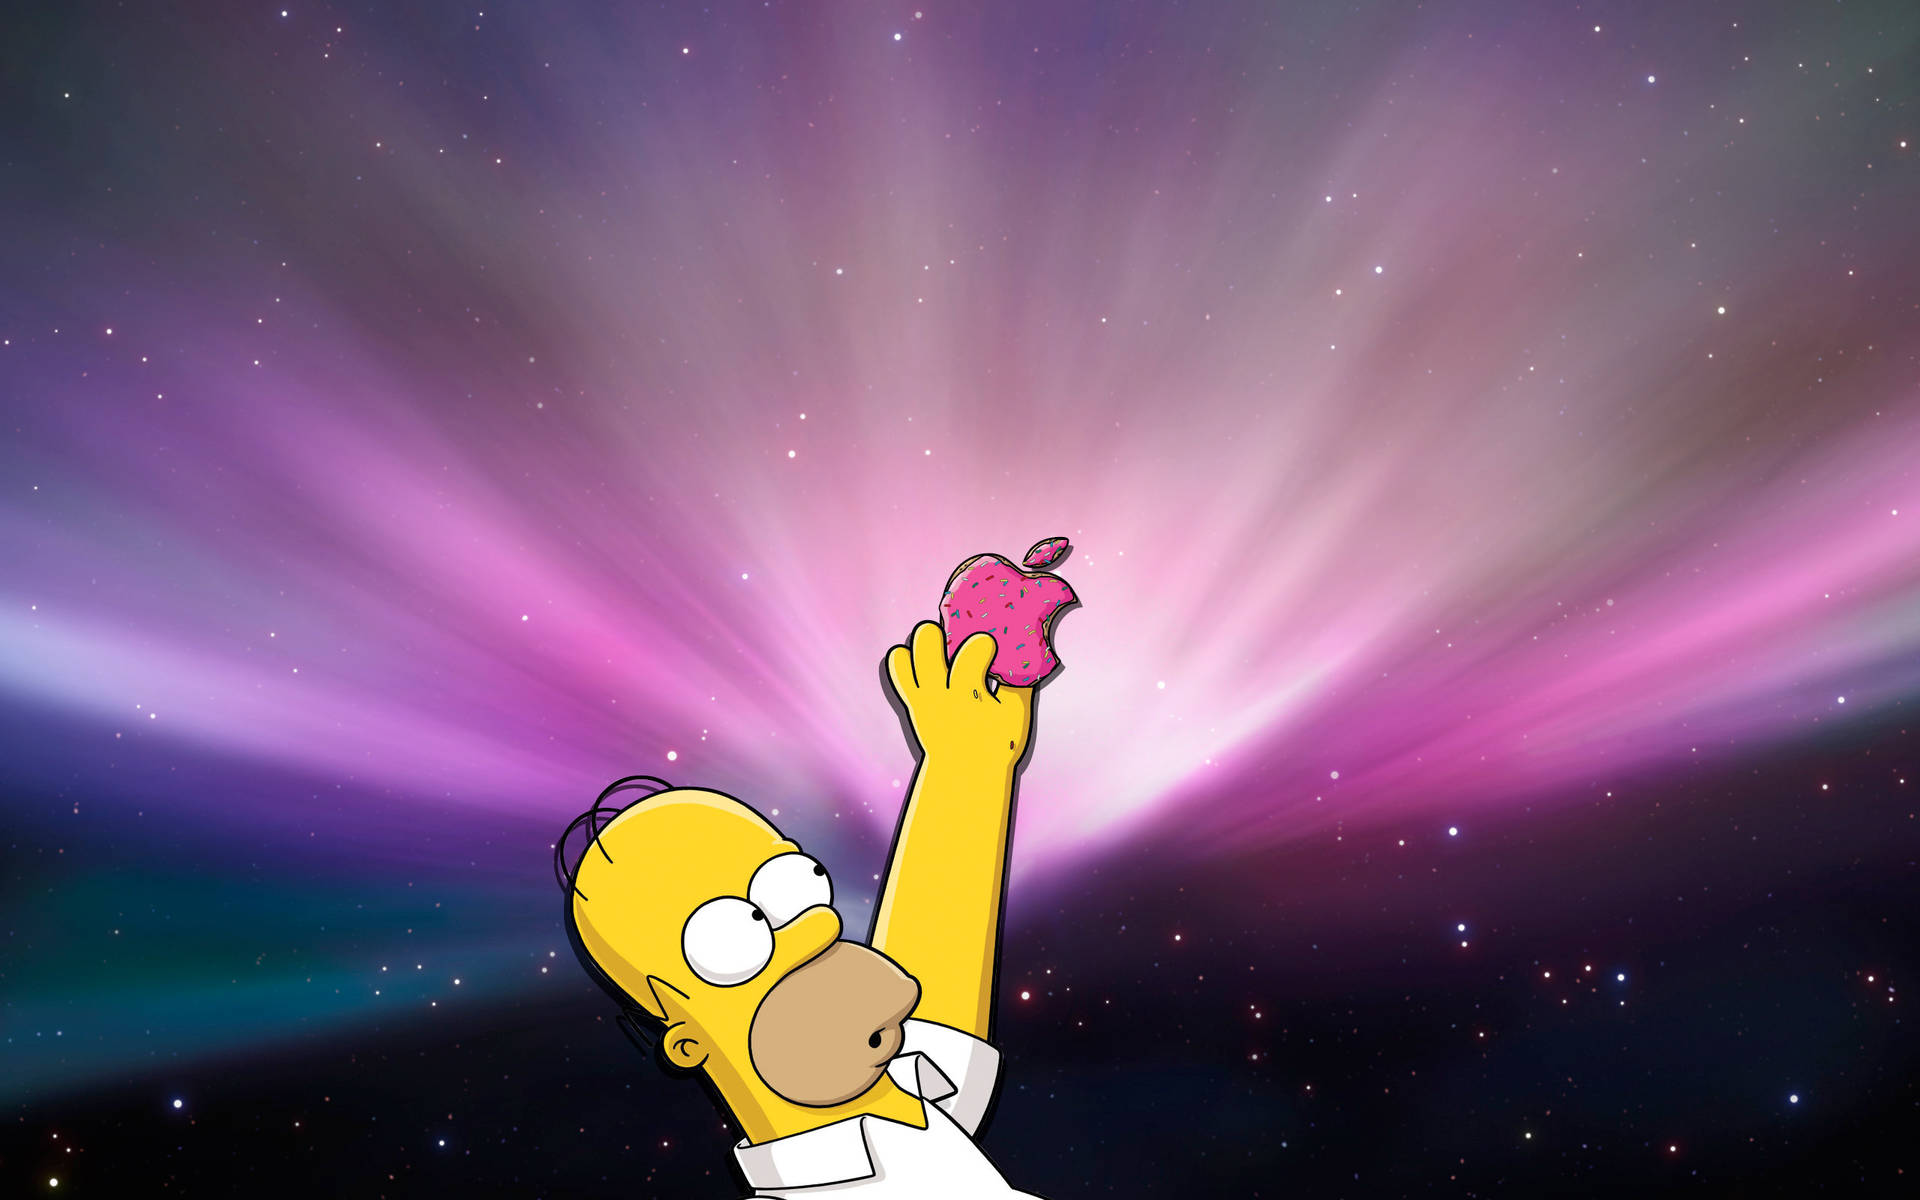 Homer Simpson proudly holding the iconic Apple logo Wallpaper